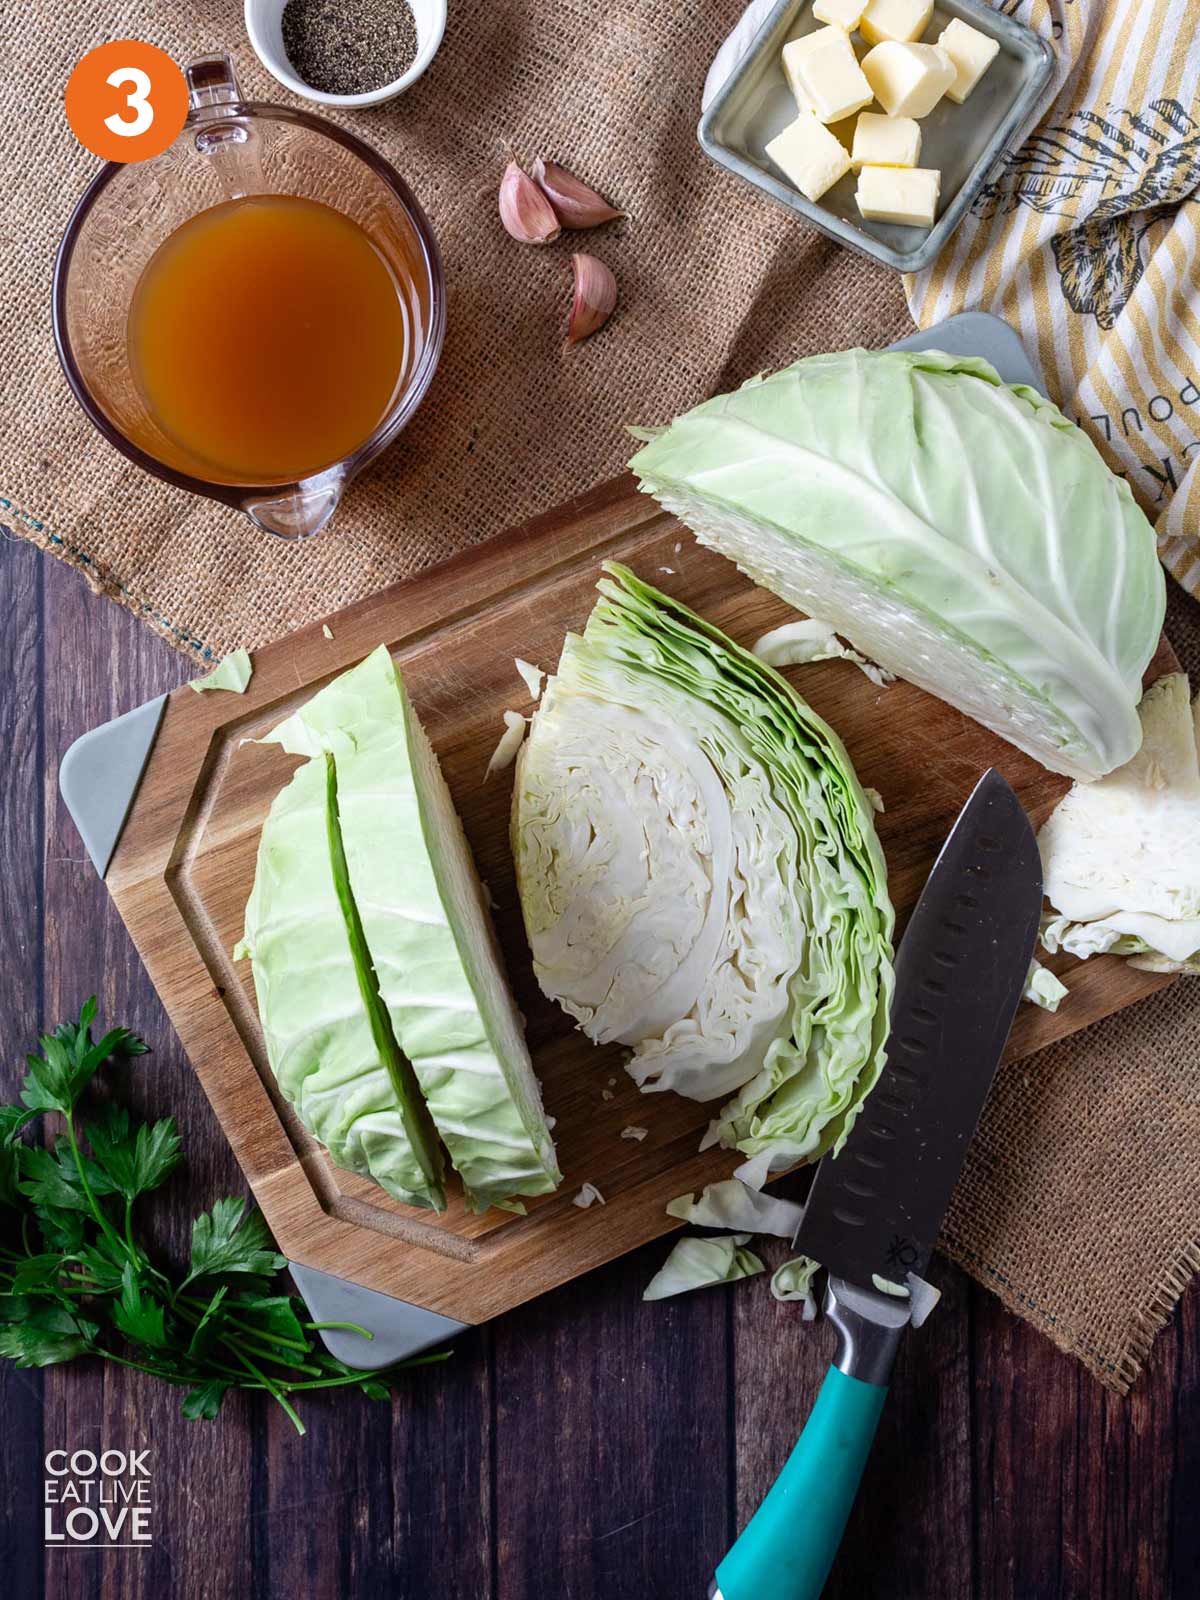 Cabbage cut into slices on a cutting board.